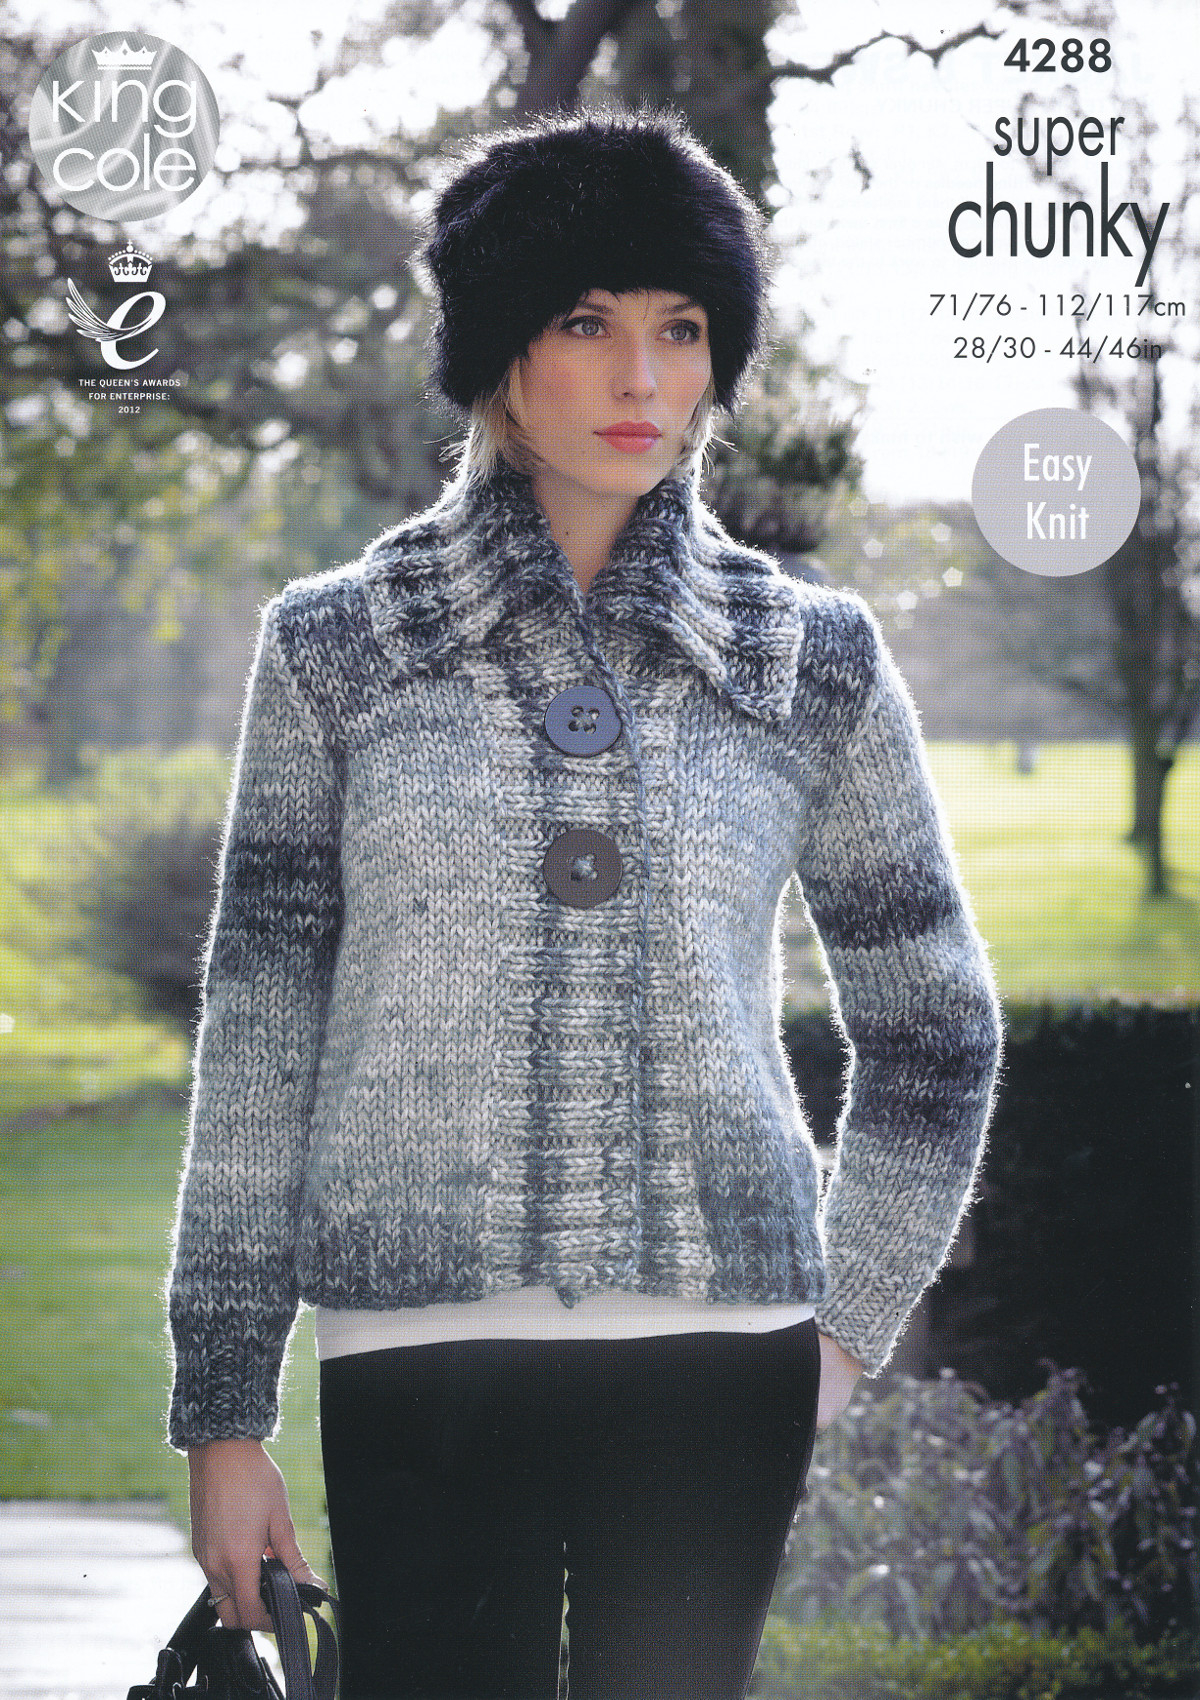 Sweater Jacket Knitting Pattern Details About Ladies Super Chunky Knitting Pattern King Cole Ribbed Jacket Sweater Jumper 4288